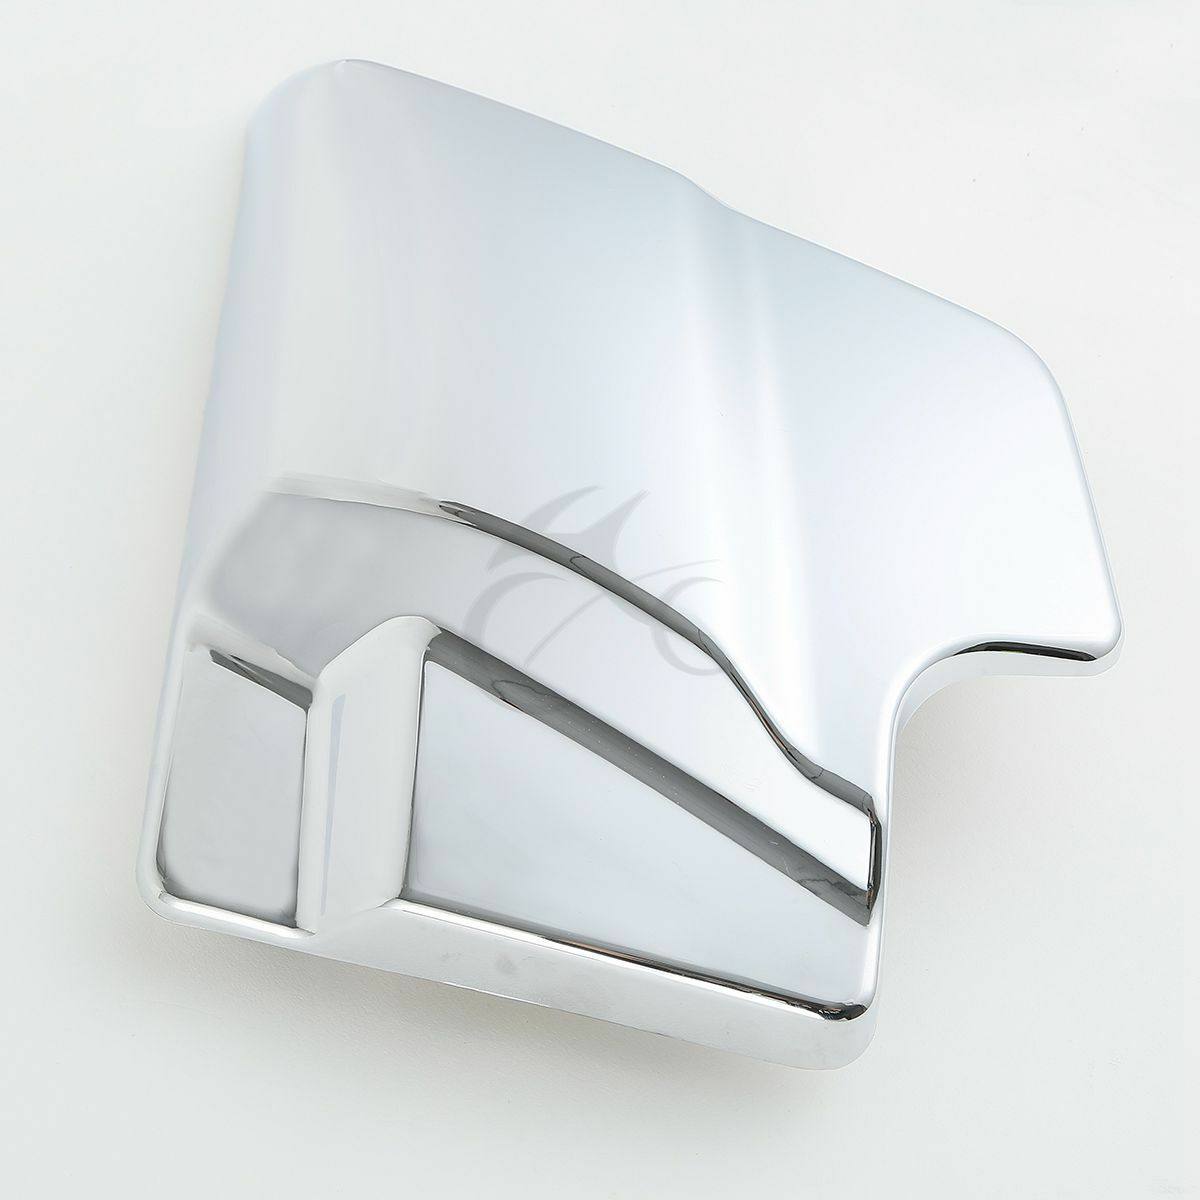 Side Cover Panel Fairing Fit For Harley Electra Street Glide 2009-2021 Chrome - Moto Life Products